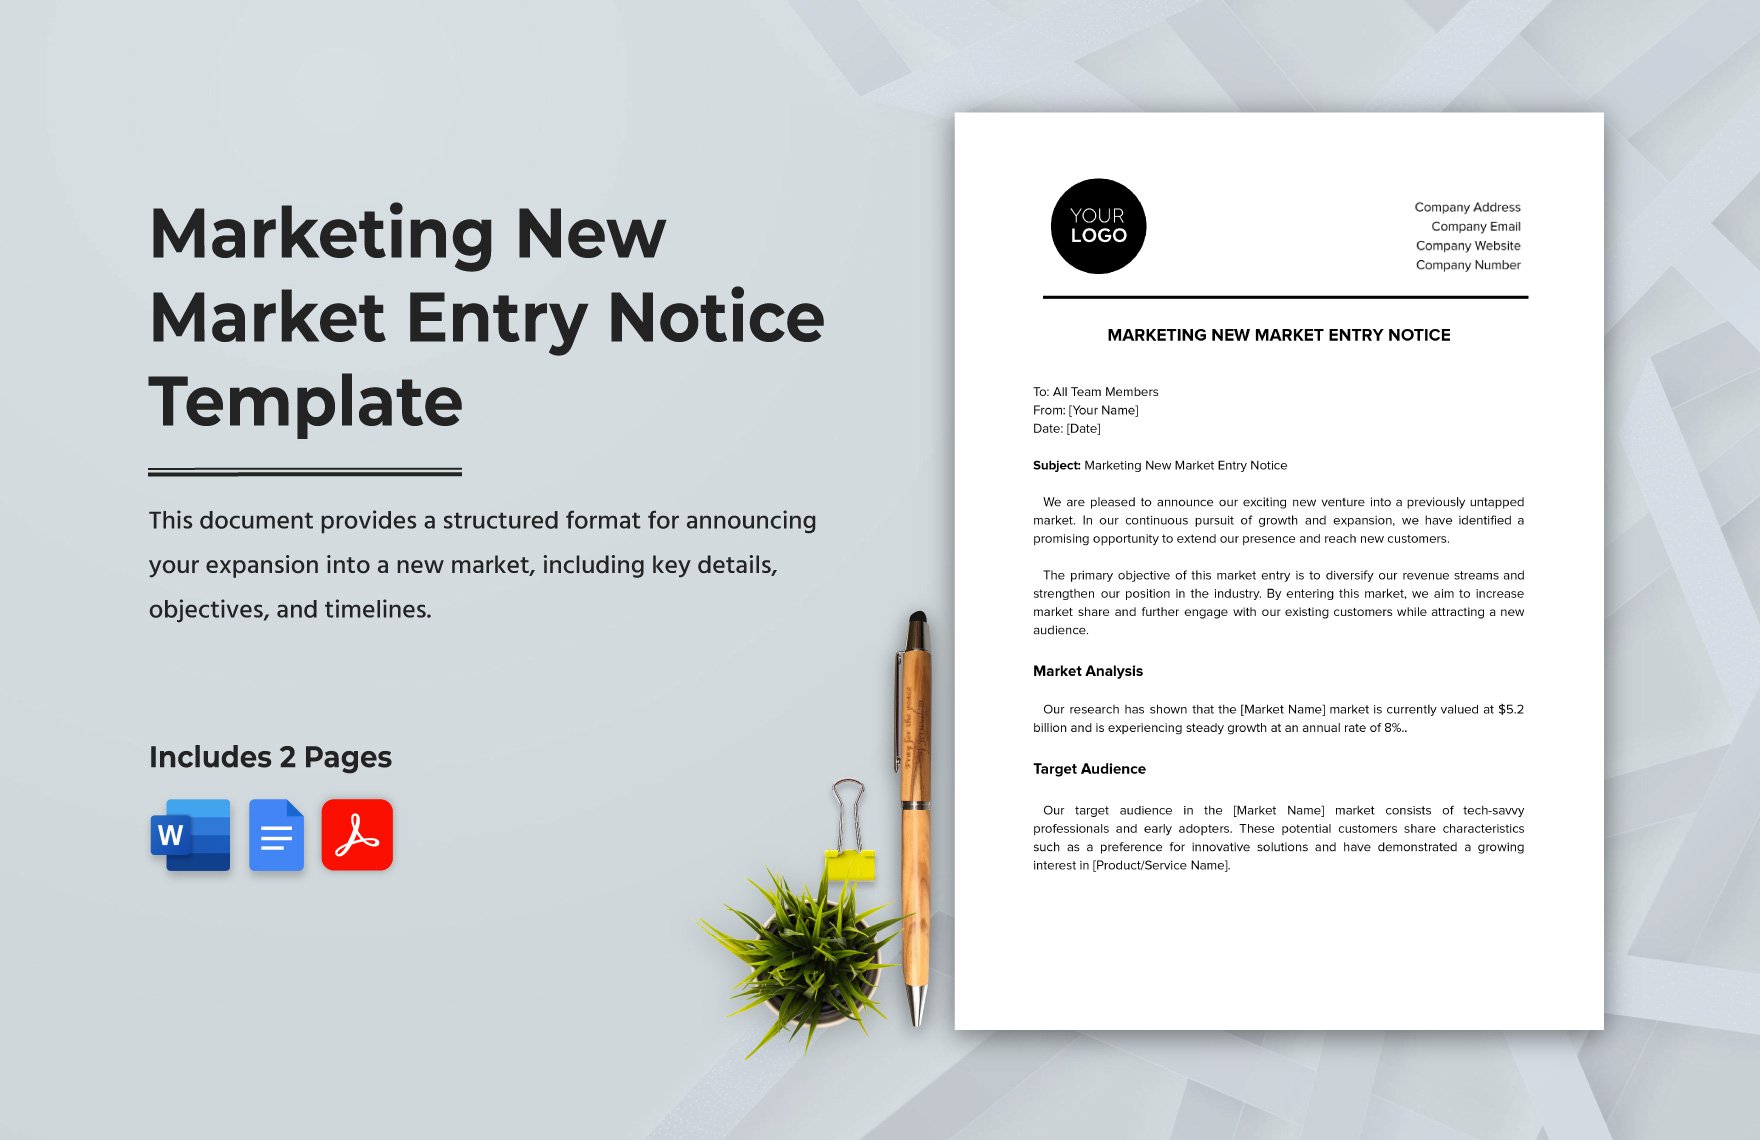 Marketing New Market Entry Notice Template in Word, Google Docs, PDF